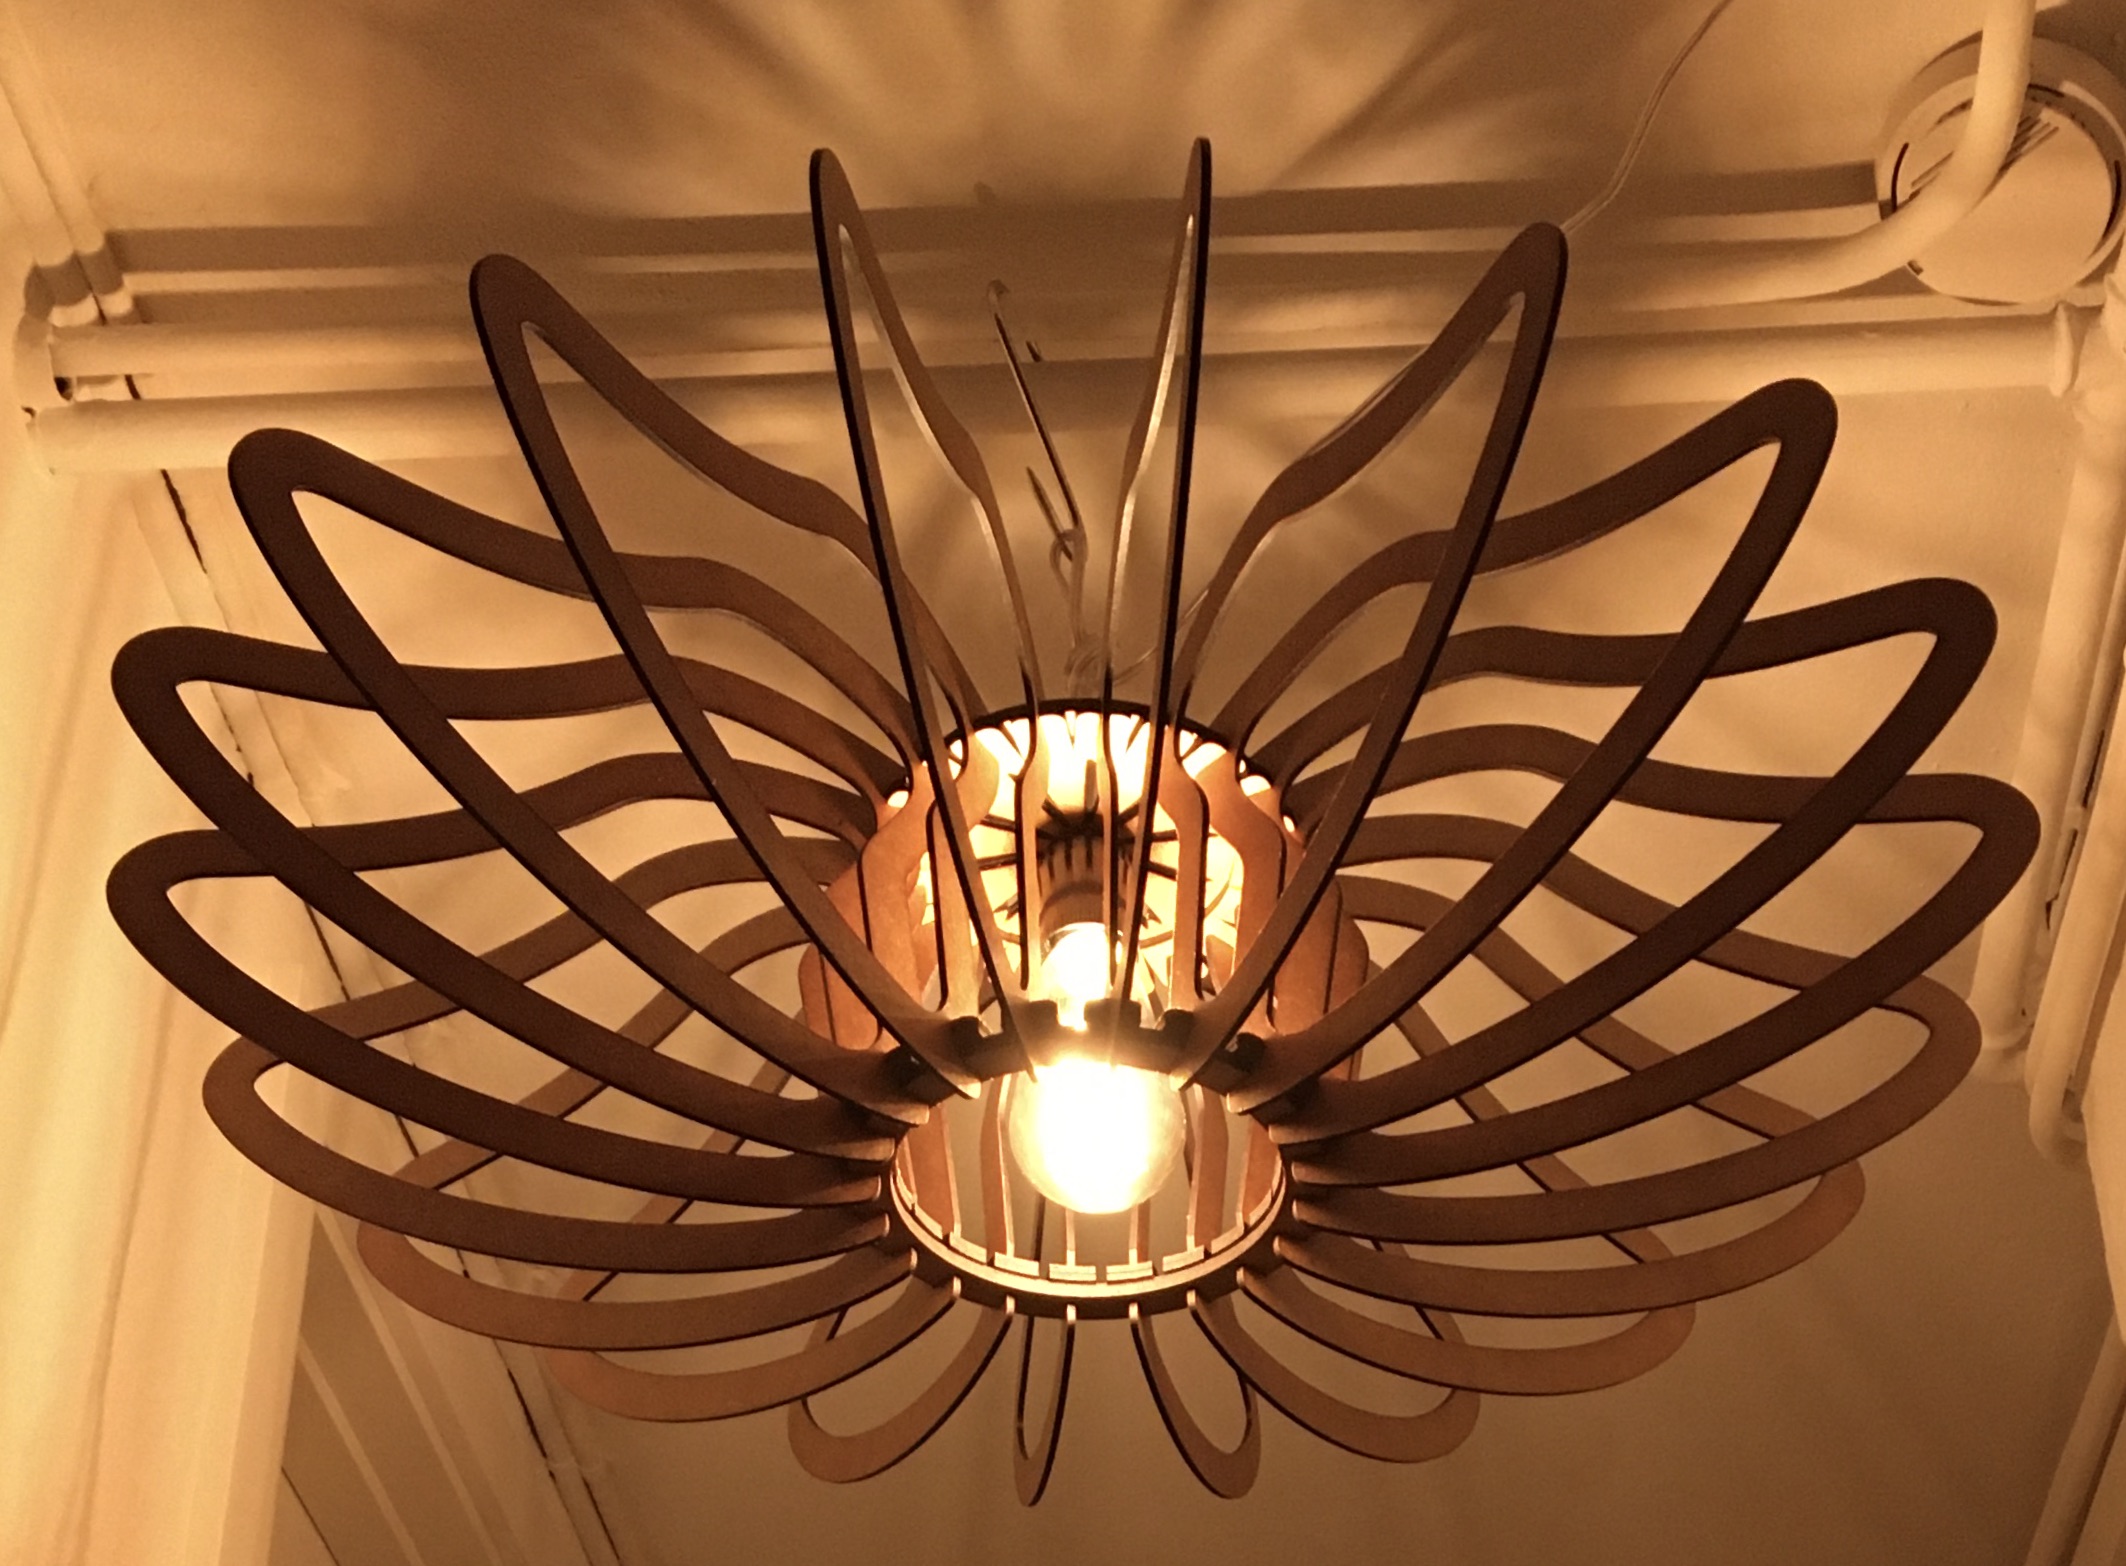 Intro to Fab Week3 – Laser Cut Lamp – Here's What I Got